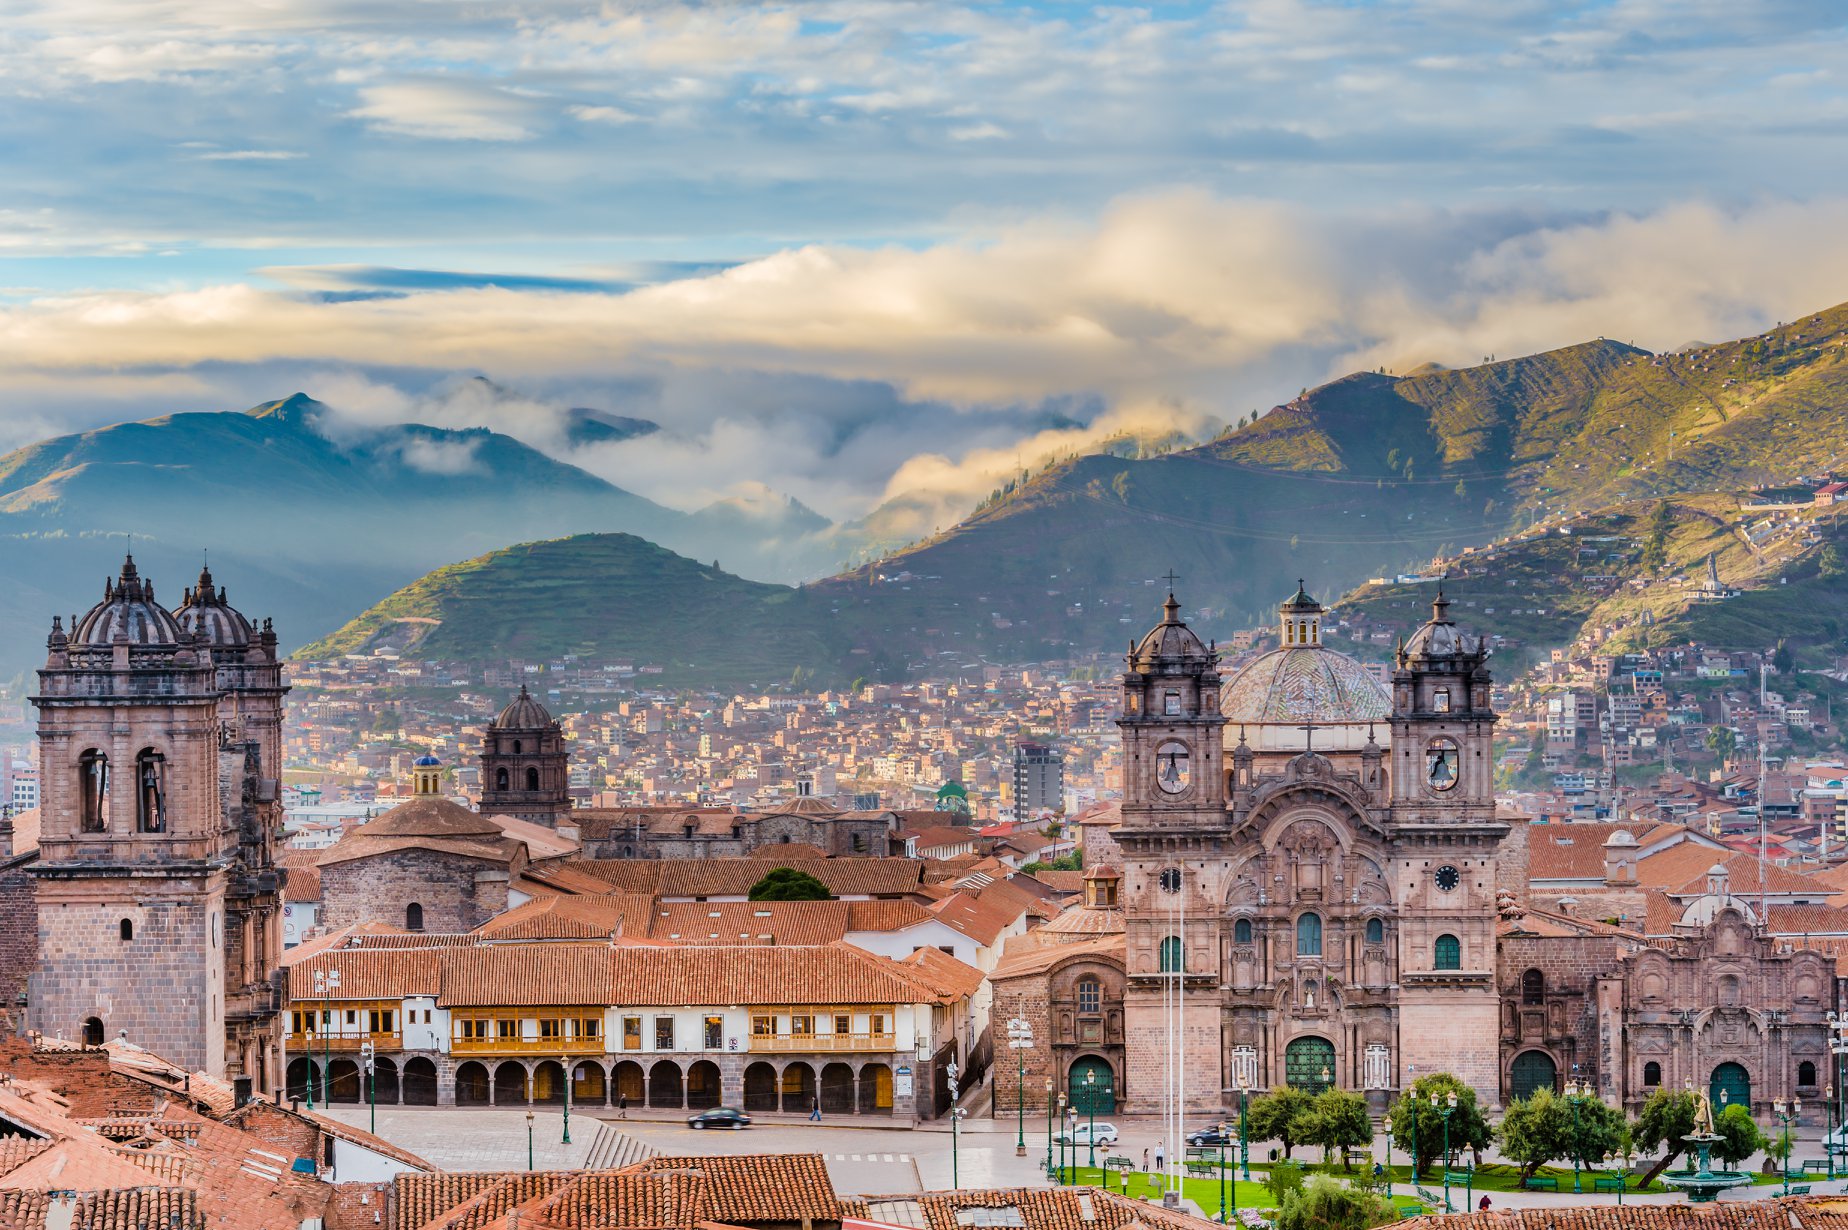 Rise and Shine in the City of Cusco